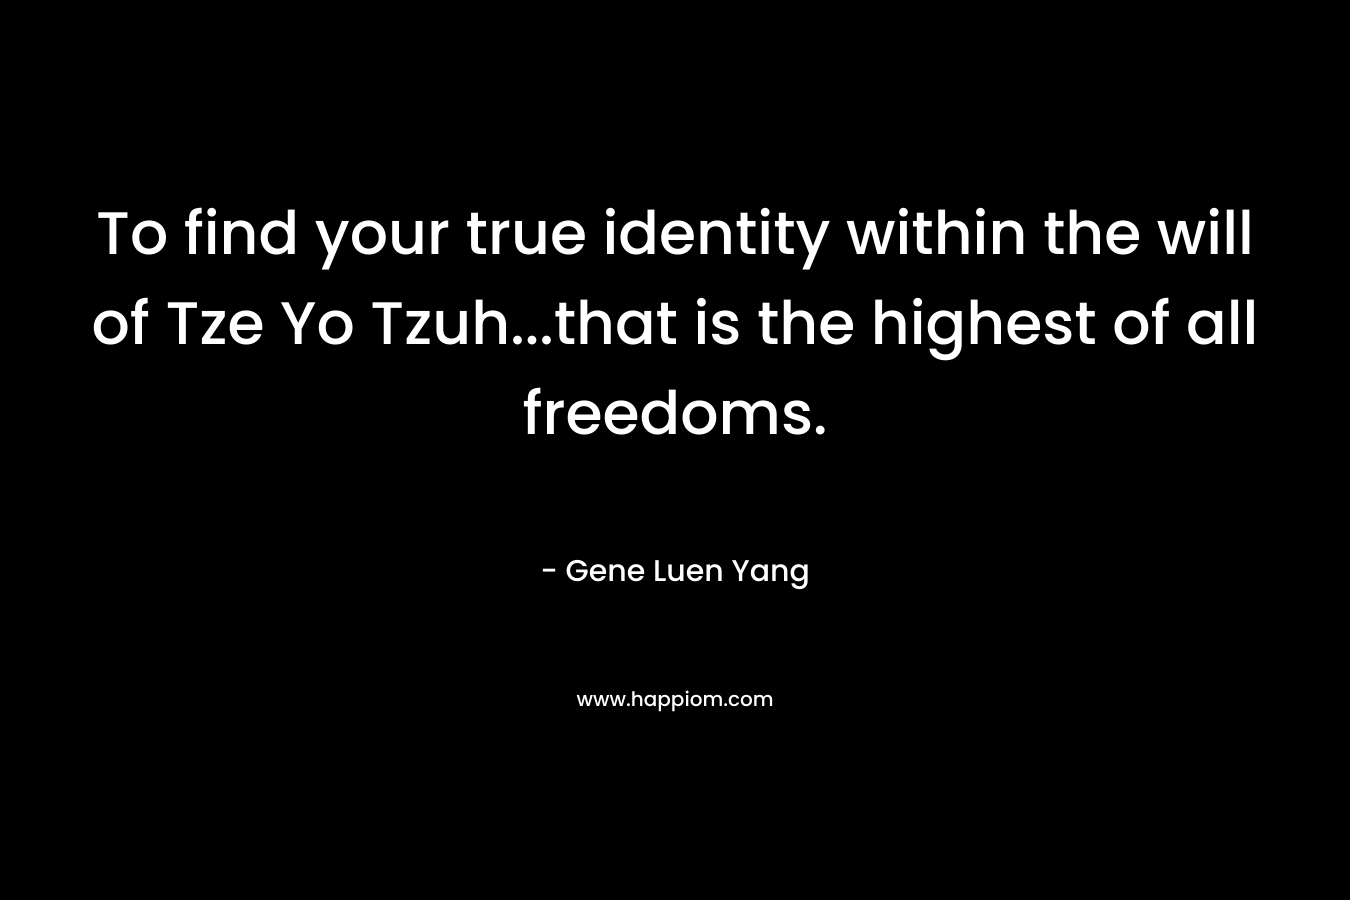 To find your true identity within the will of Tze Yo Tzuh…that is the highest of all freedoms. – Gene Luen Yang